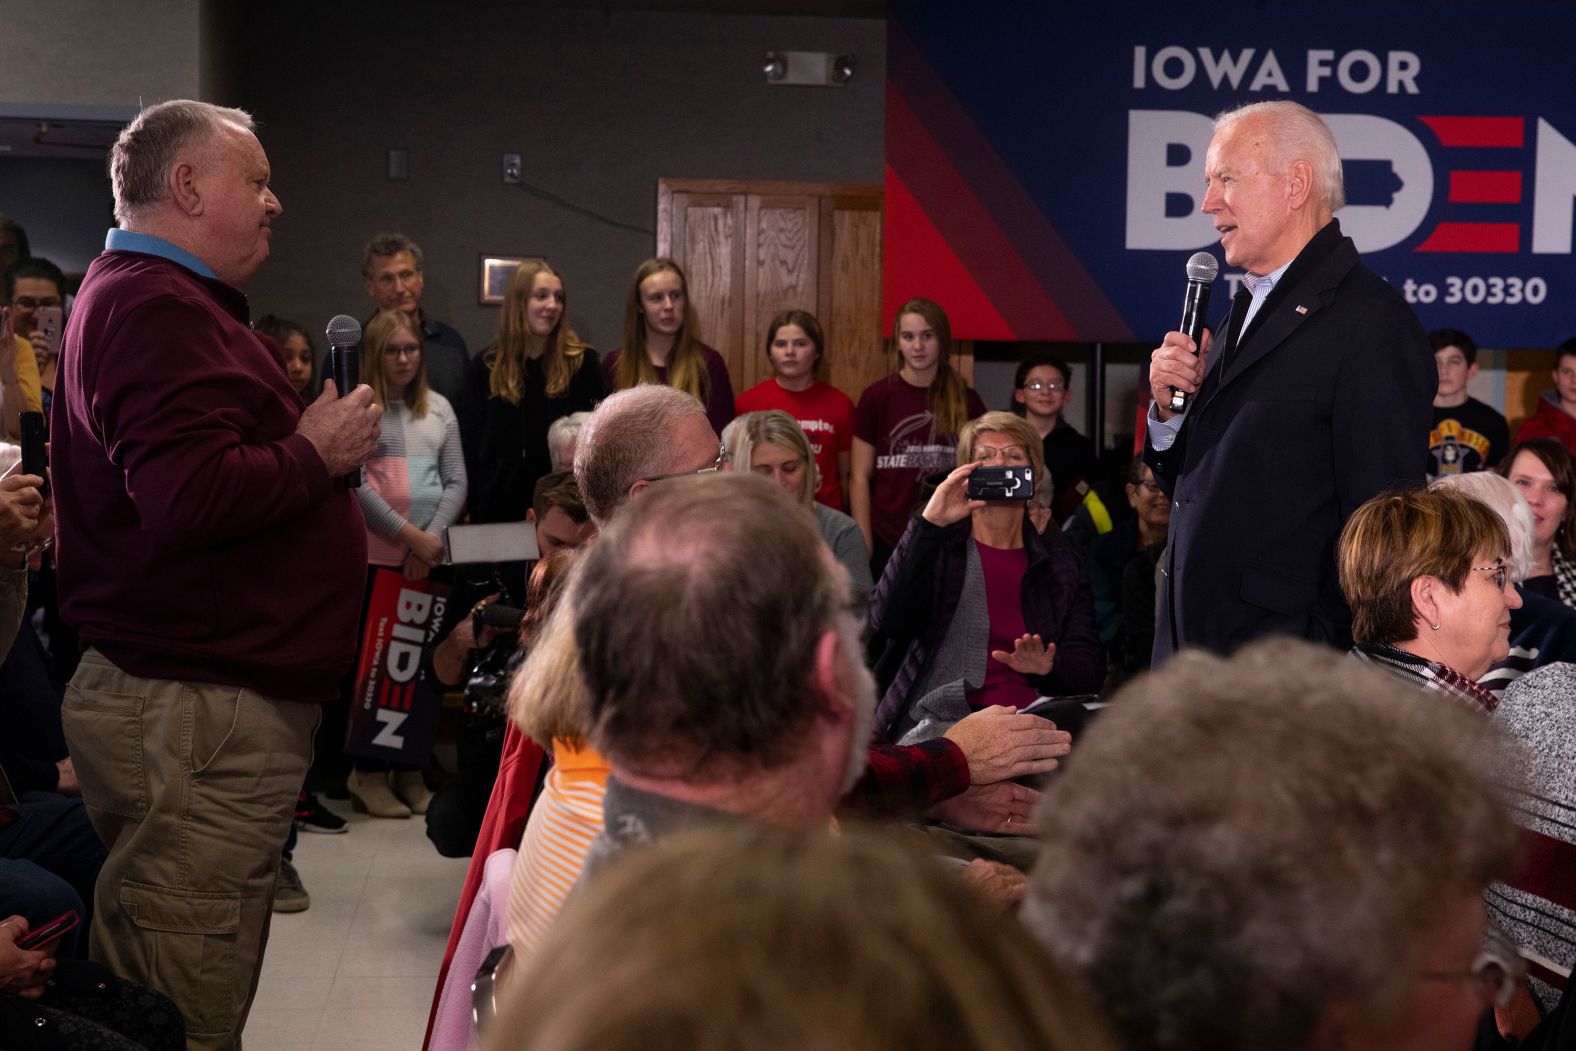 Biden is questioned about his son Hunter during a campaign stop in New Hampton, Iowa, in December 2019. Biden grew visibly frustrated with the man, <a href="https://www.cnn.com/2019/12/05/politics/joe-biden-damn-liar-exchange/index.html" target="_blank">calling him a "damn liar"</a> after the man accused Biden of sending his son to Ukraine "to get a job and work for a gas company, that he had no experience with gas, nothing." Hunter Biden served on the board of a Ukrainian gas company while his father was vice president. He said recently he used "poor judgment" in serving on the board of the company while his father was pushing anti-corruption measures in Ukraine on behalf of the US government, but he added that he didn't do anything improper. There is no evidence of wrongdoing by either Joe or Hunter Biden.